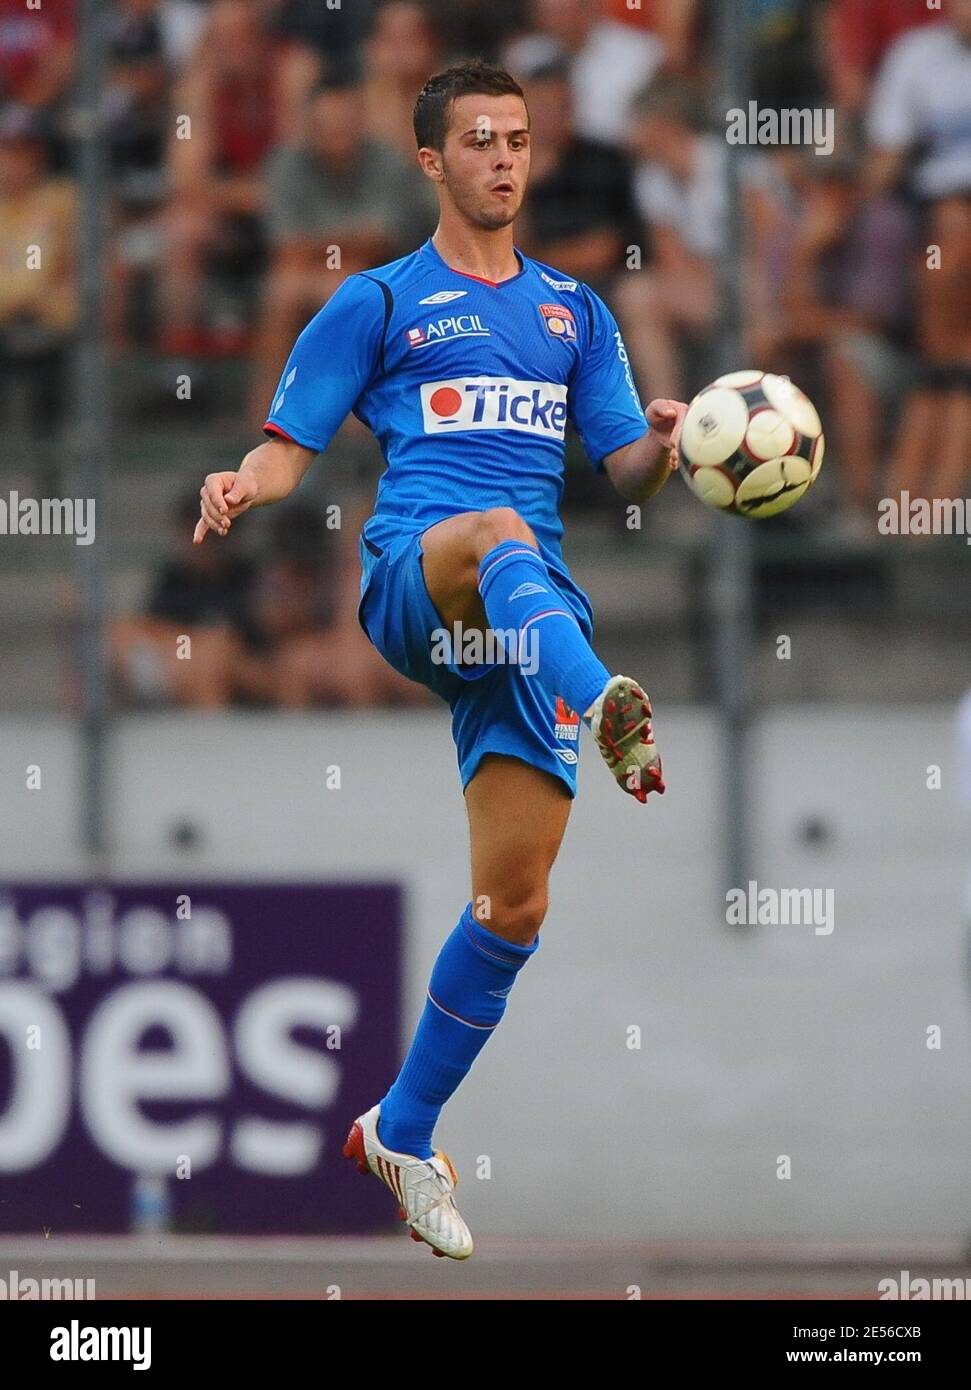 Lyon's Miralem Pjanic during a friendly soccer match, Olympique Lyonnais vs  AS Monaco at the Parc des Sports in Annecy, France on July 29, 2008. Monaco  won 1-0. Photo by Steeve McMay/Cameleon/ABACAPRESS.COM